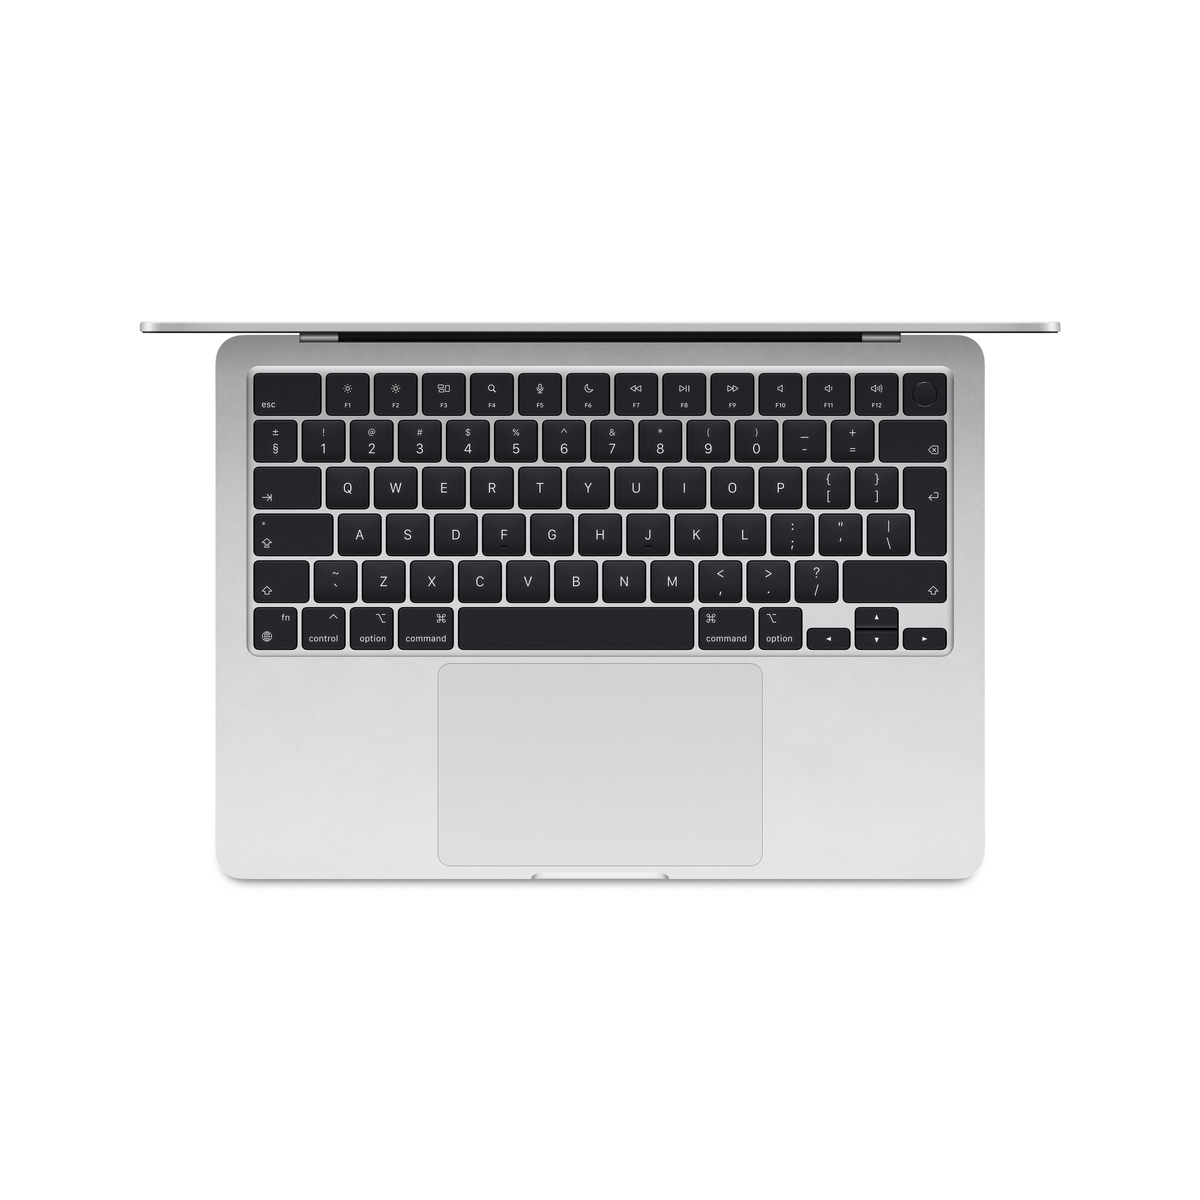 Apple MacBook Air, 13 inches, 8 GB RAM, 256 GB SSD, Apple M3 chip with 8-core CPU and 8-core GPU, macOS, Arabic, Silver